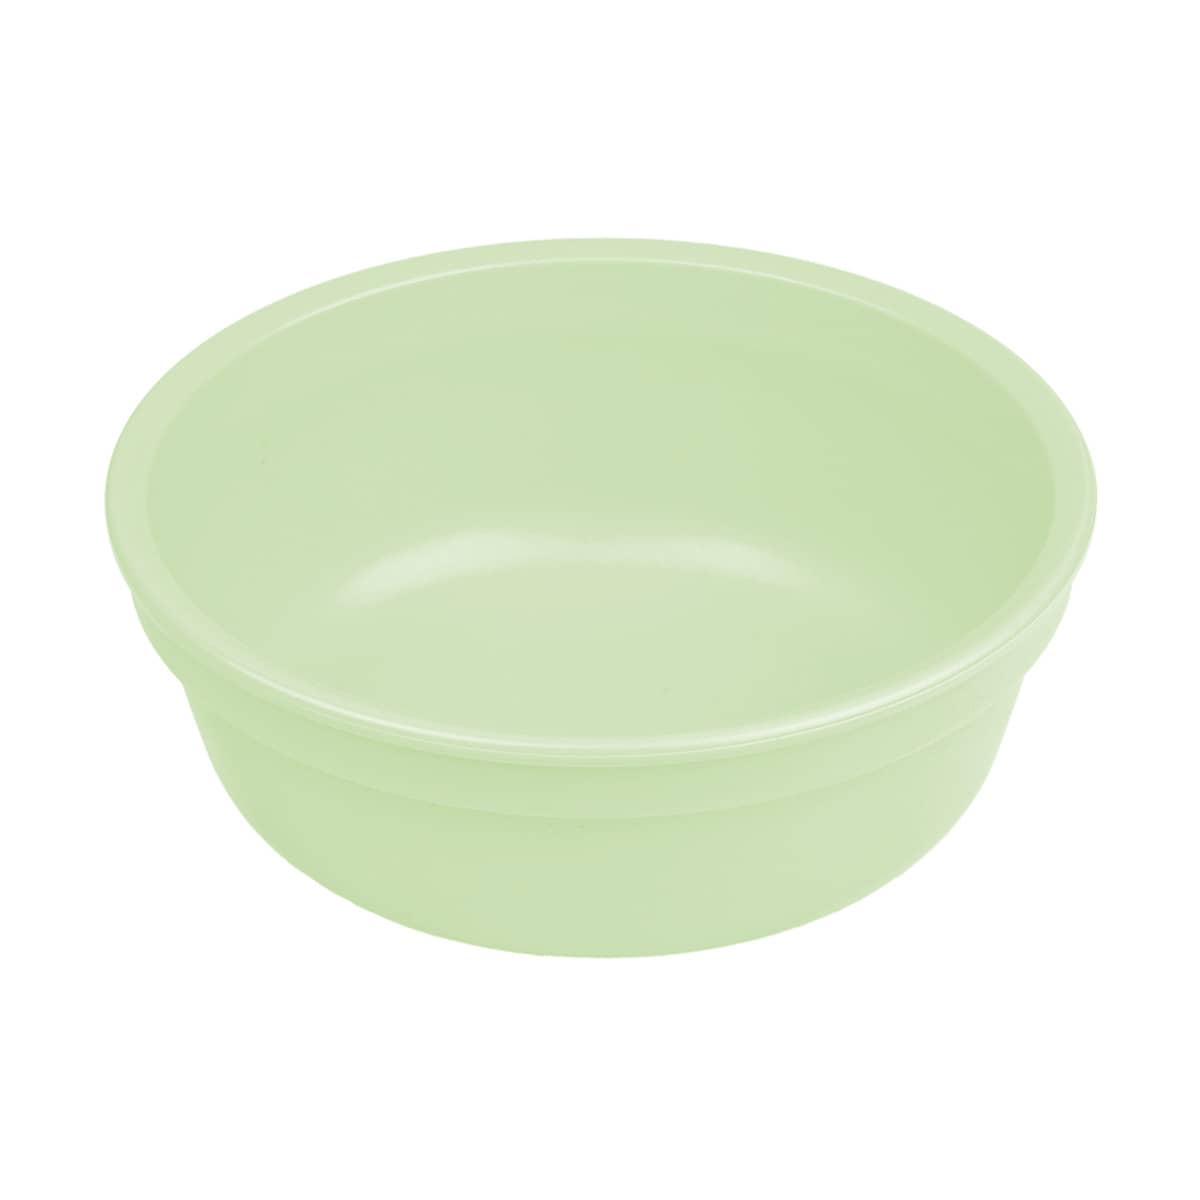 Re-Play Recycled Bowl - Naturals Collection - Leaf Green